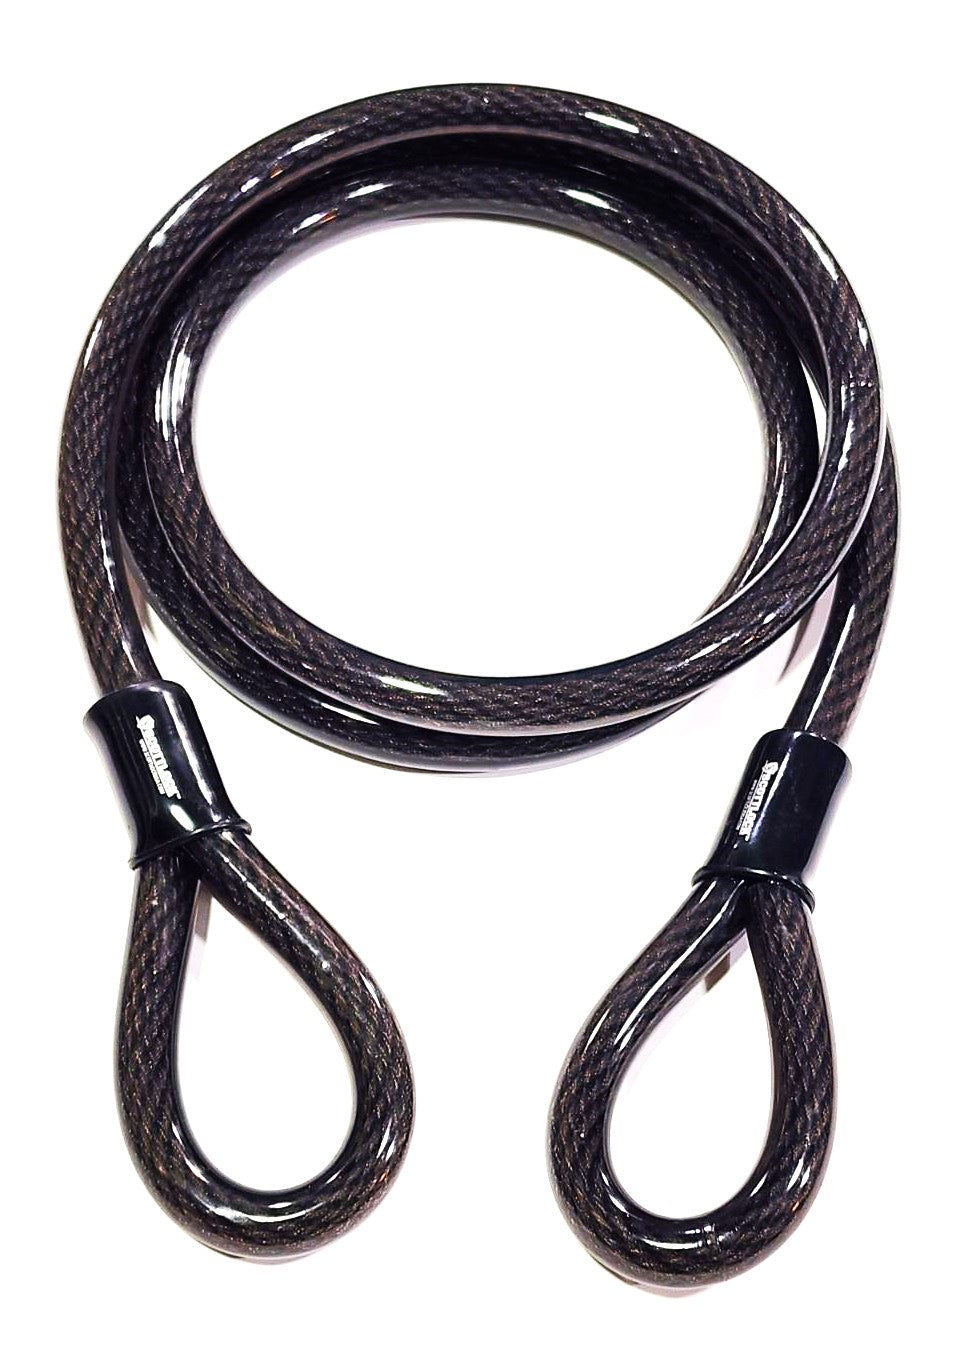 20mm High Security Dual Loop Steel Cable - "Colossal Cable"